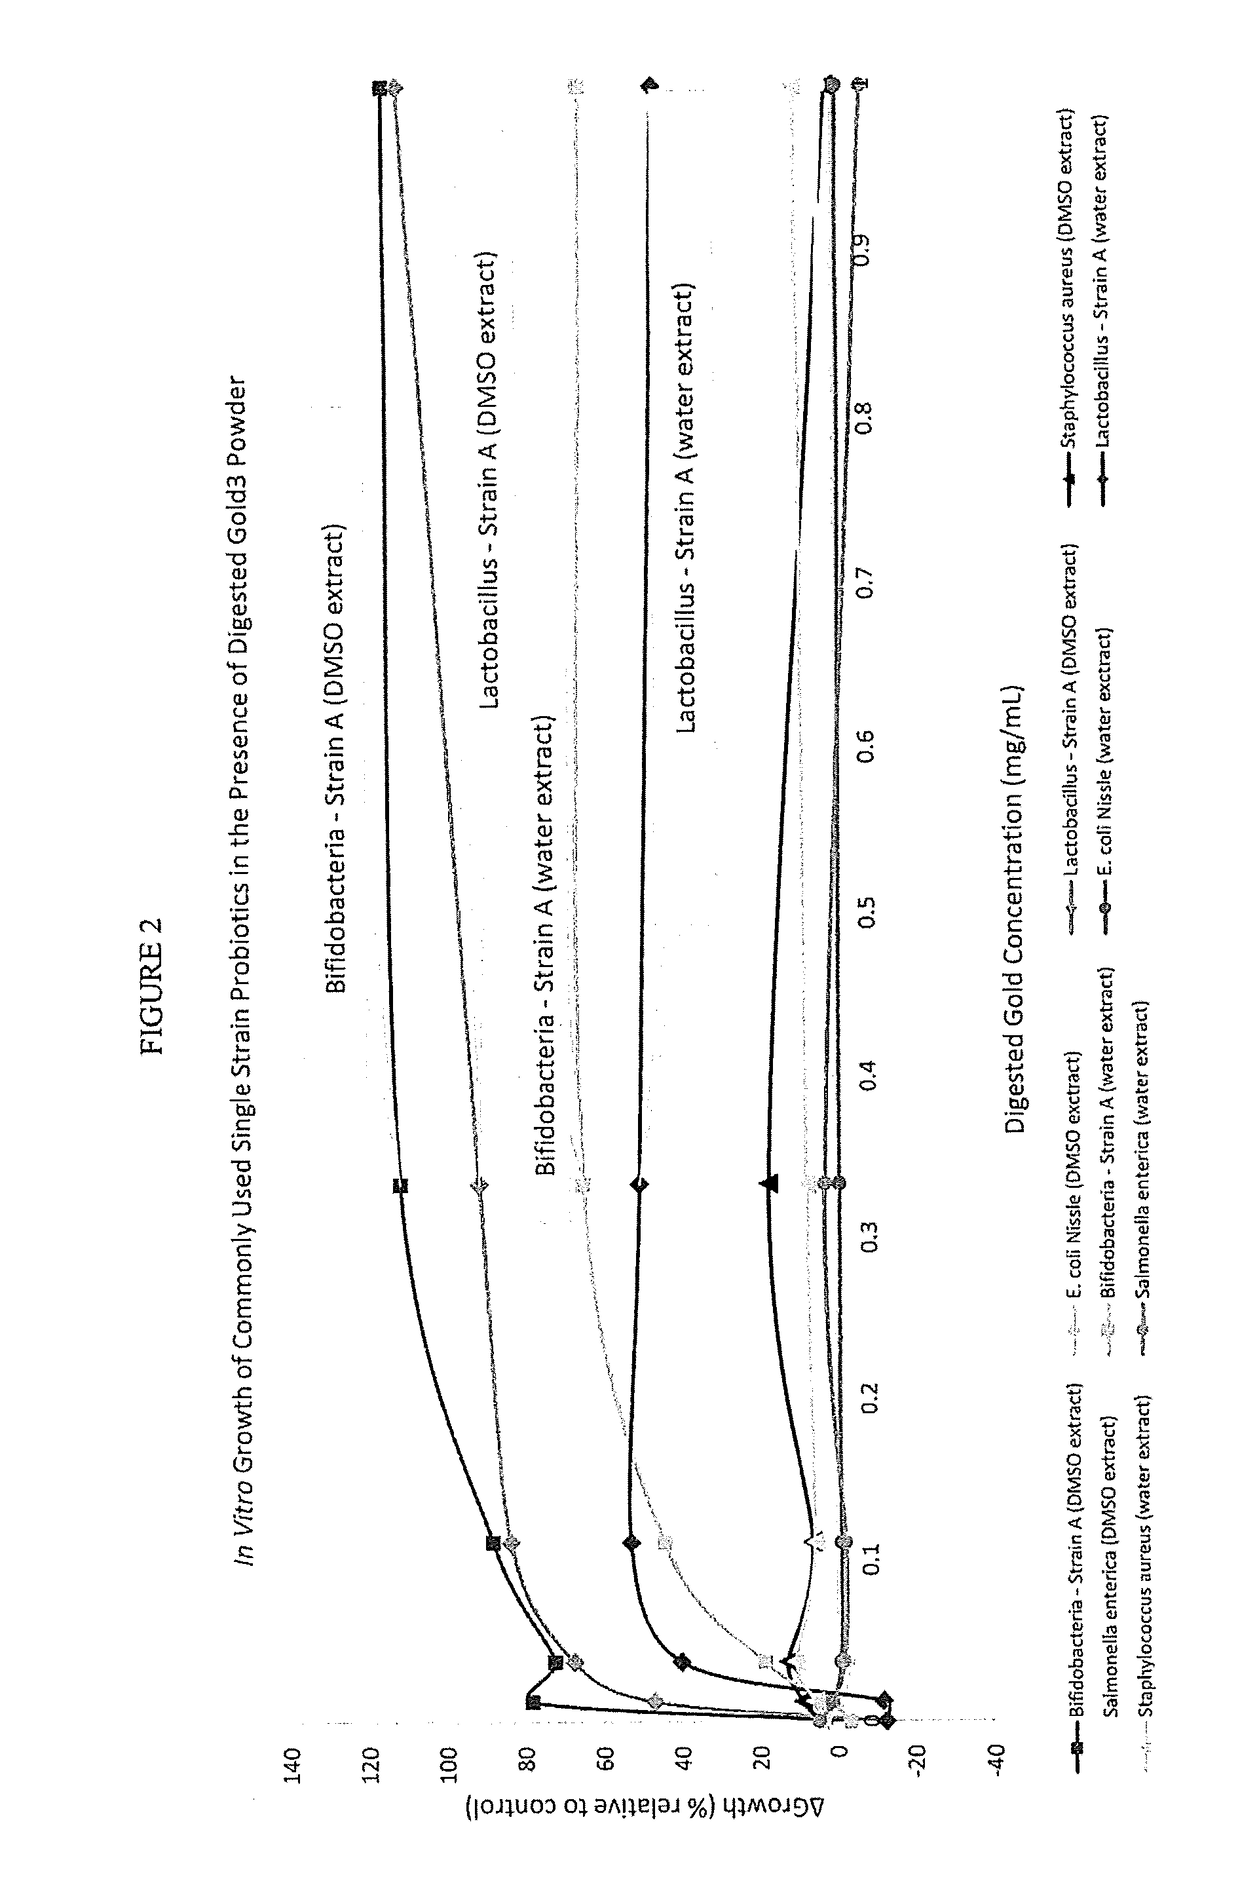 Gold kiwifruit compositions and methods of preparation and use therefor